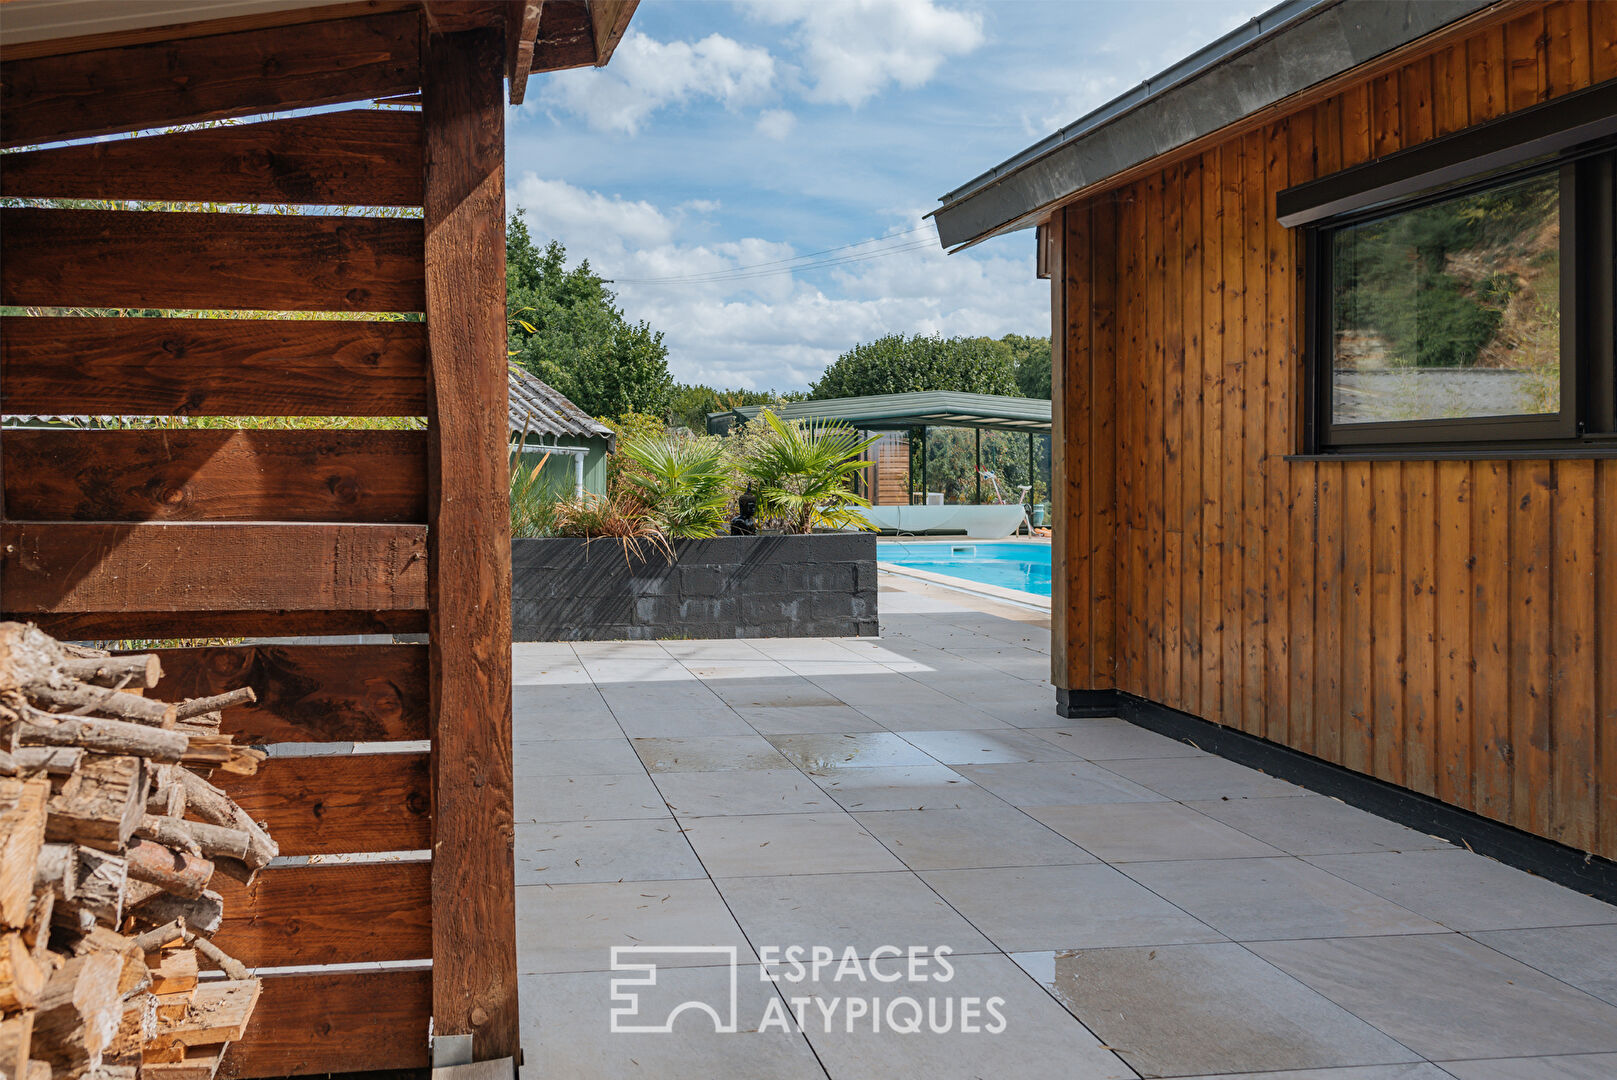 Charming country property and its outbuildings south of Rennes